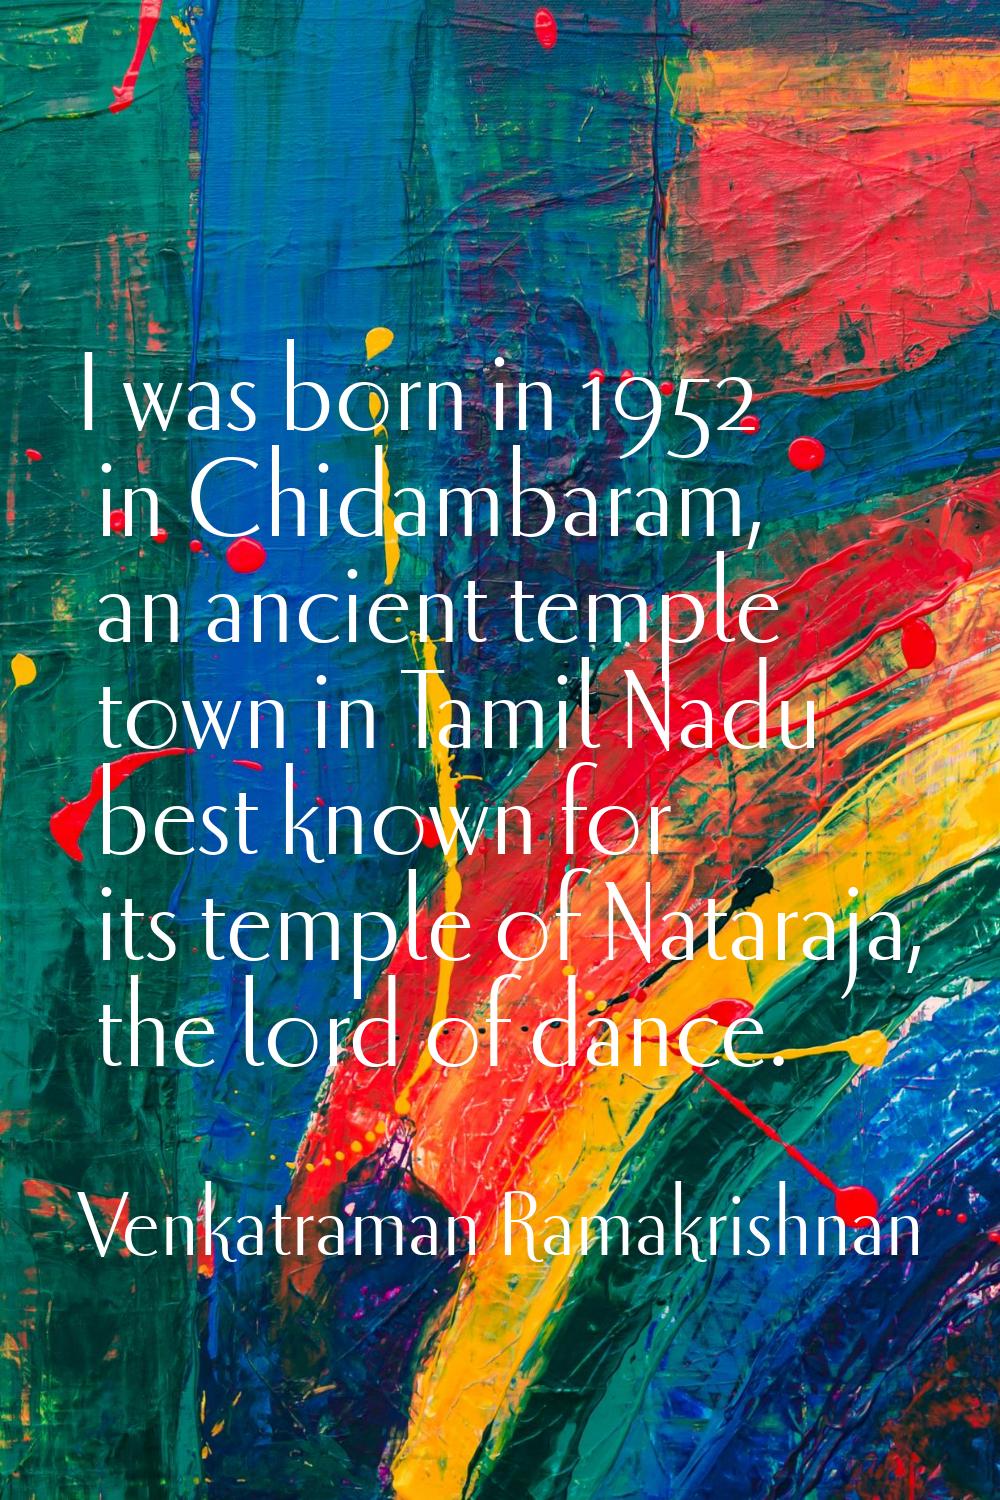 I was born in 1952 in Chidambaram, an ancient temple town in Tamil Nadu best known for its temple o